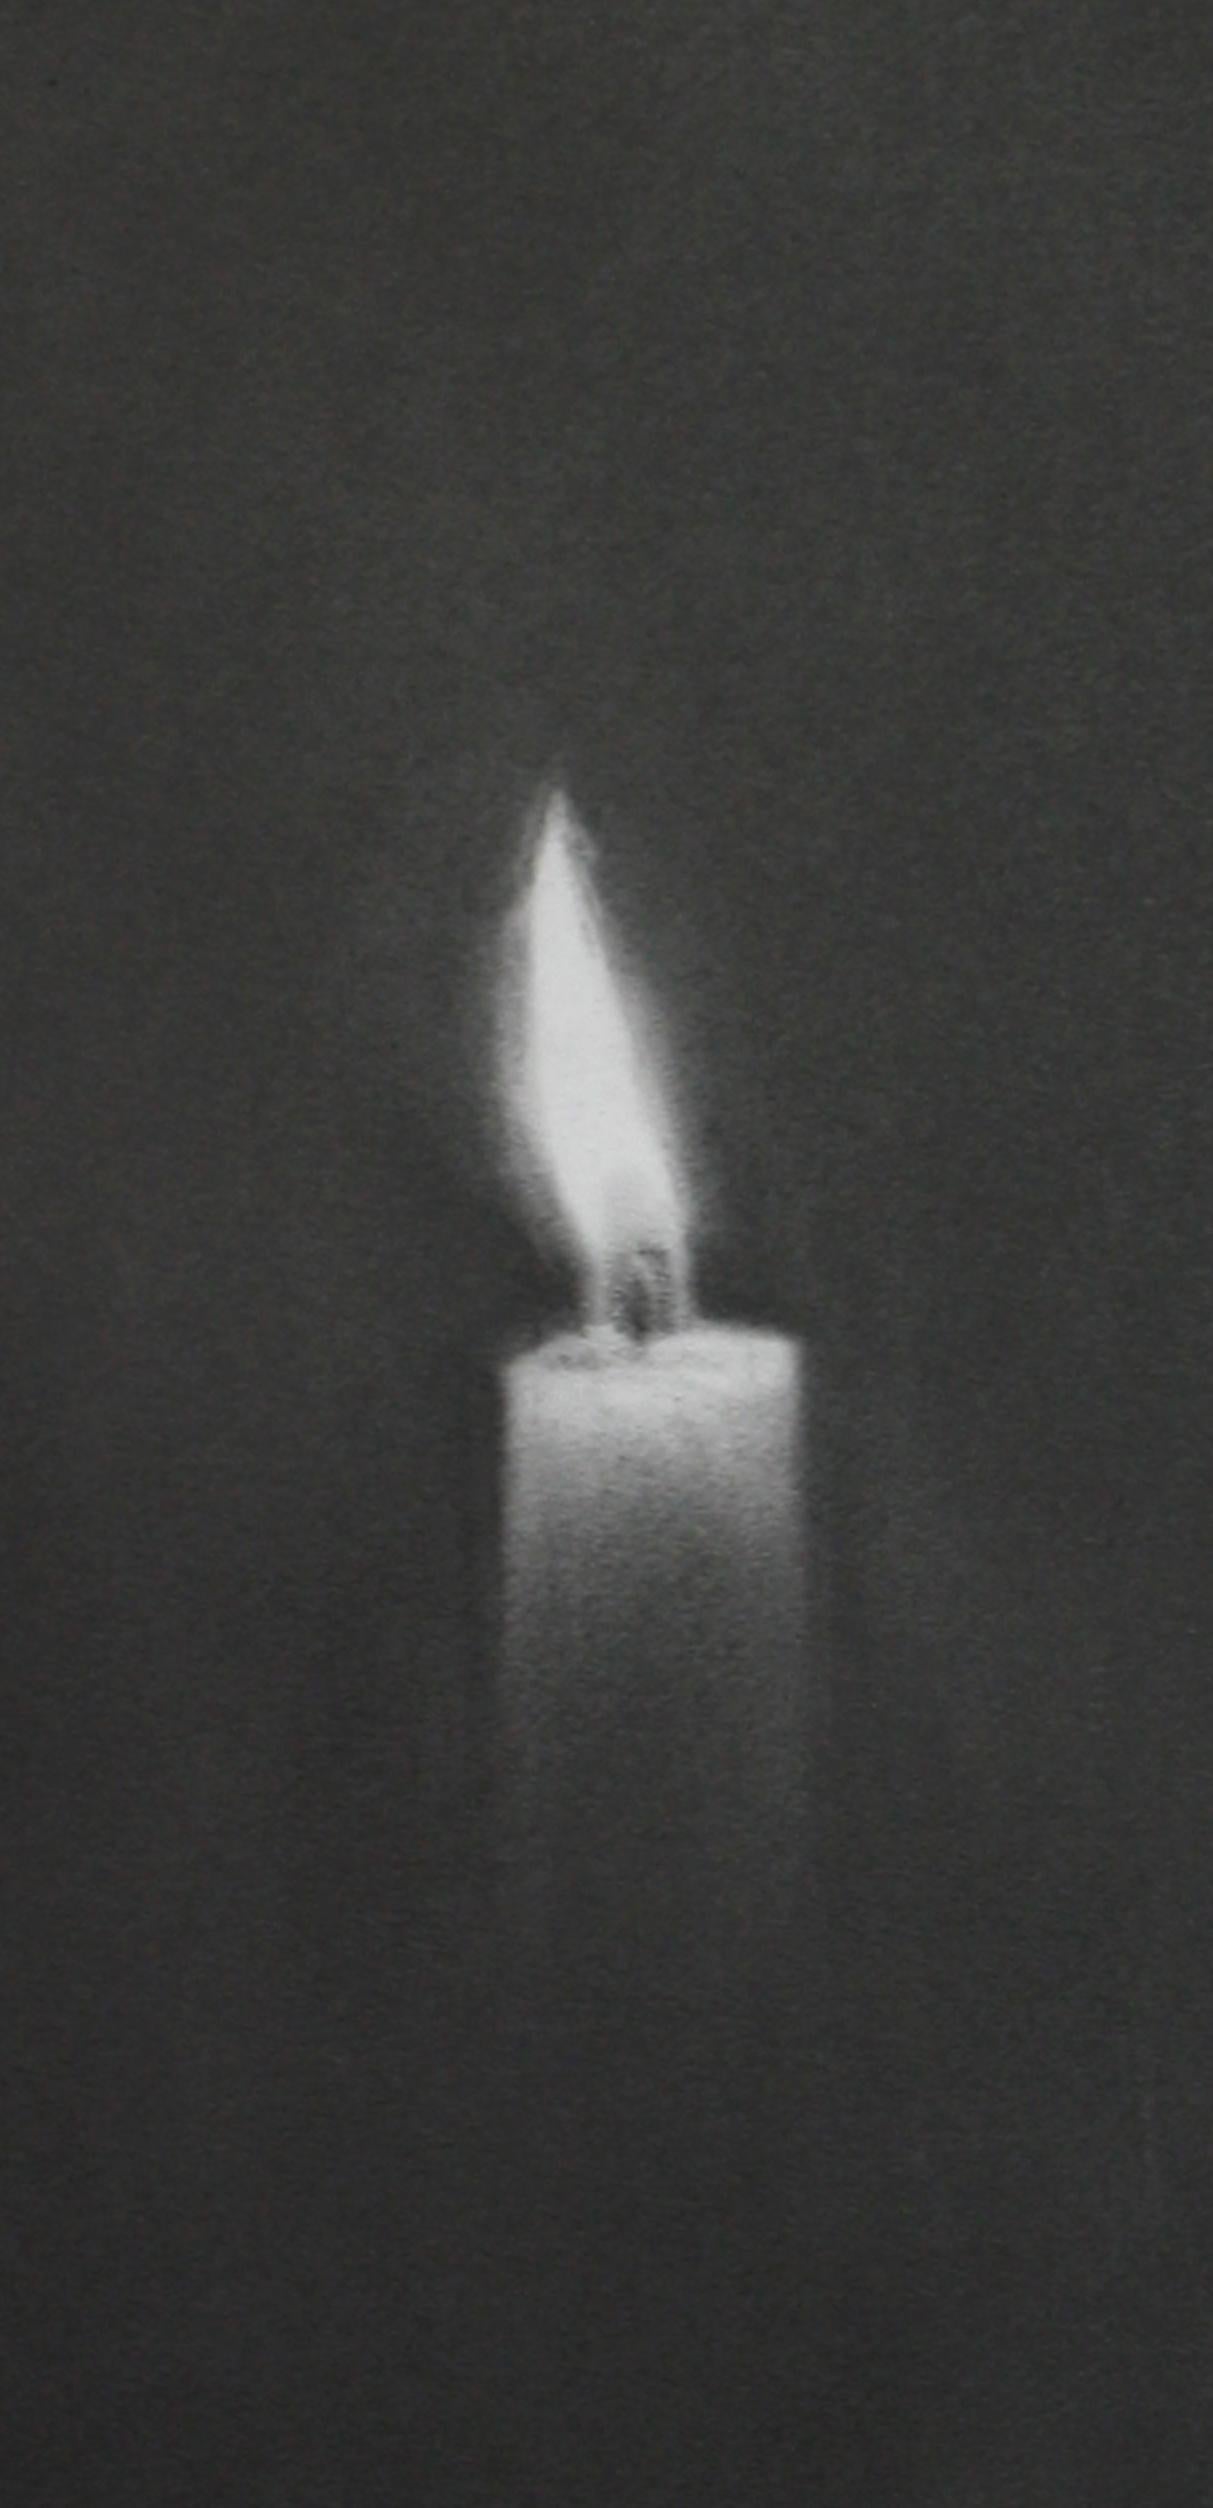 Simon Schubert
Untitled (Candle 9), 2015
Graphite on paper
13.75 x 9.75 inches

In Schubert’s most recent work, he continues exploring architectural details and empty domestic interiors with folded paper and graphite. The elaborate project involves